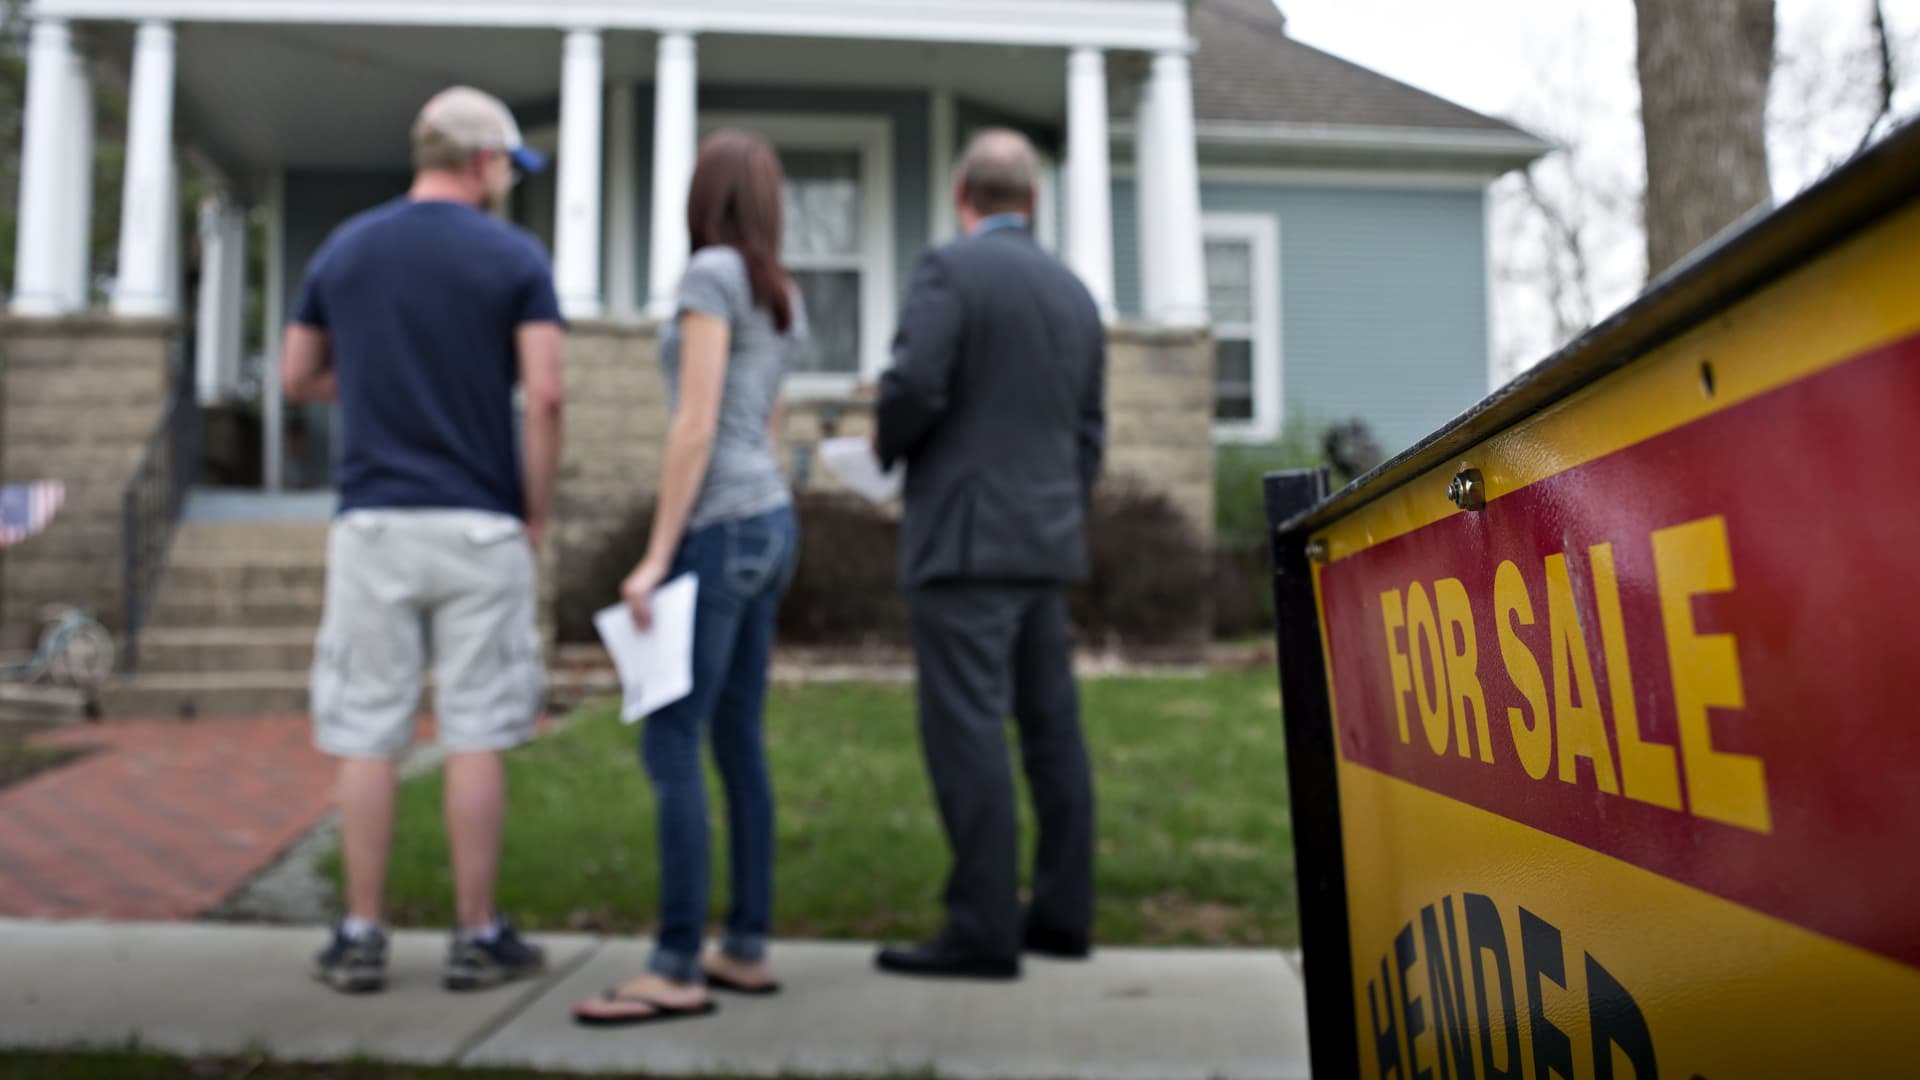 30-year fixed mortgage crosses 5% for the first time in years